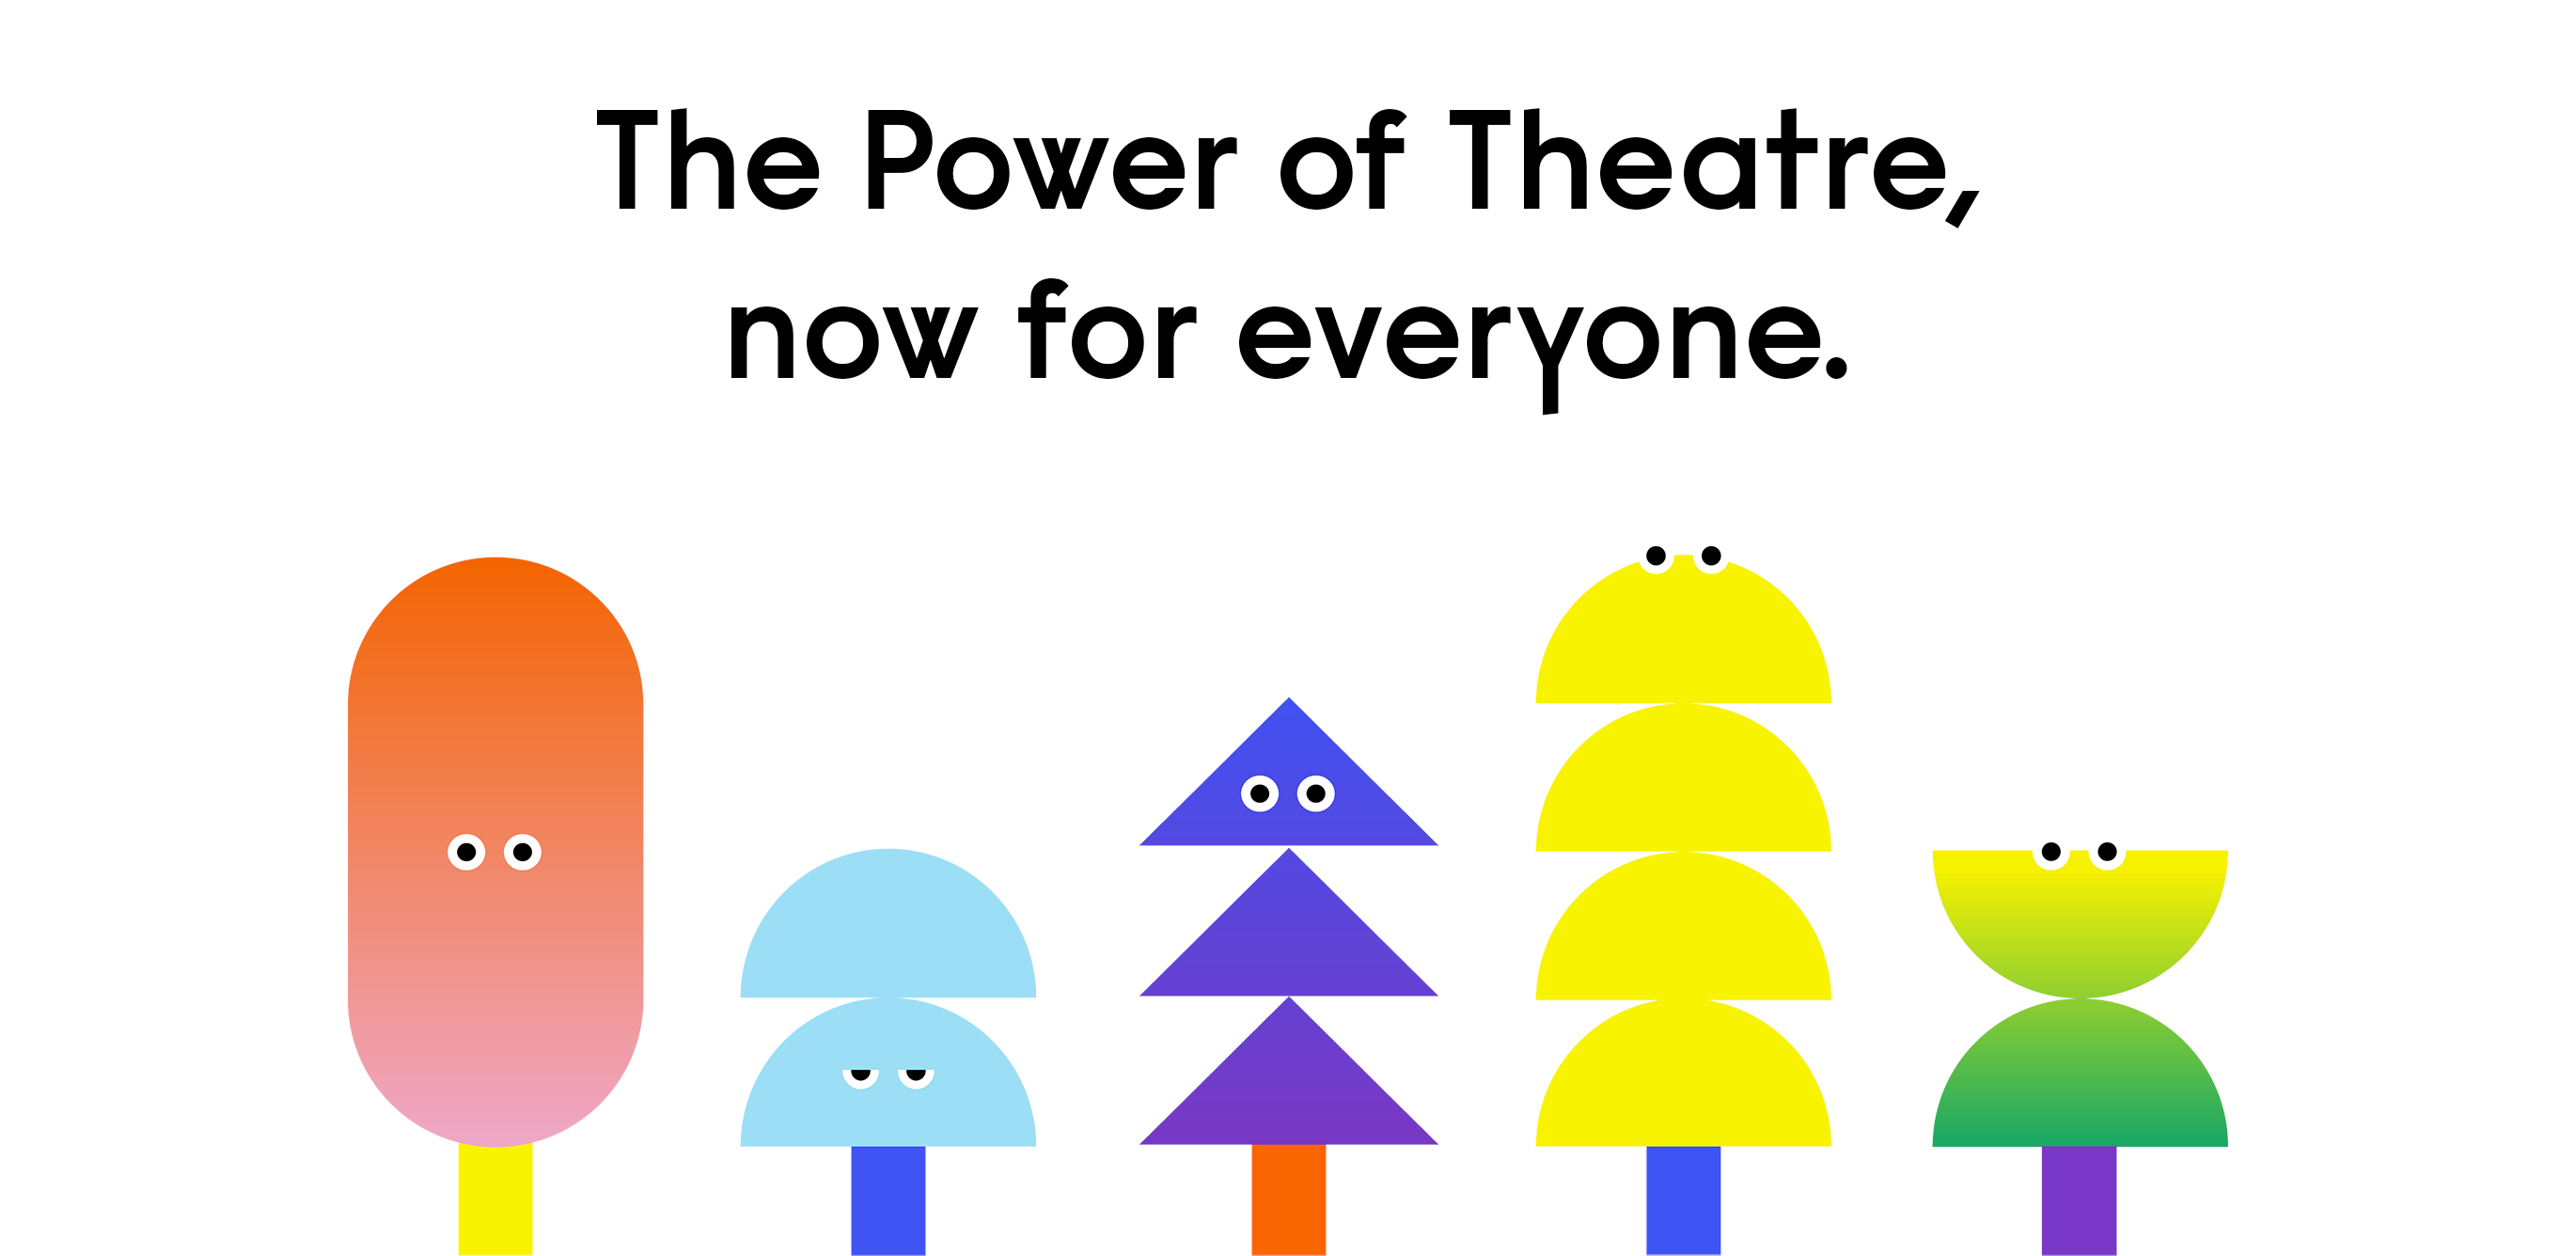 The power of theatre, now for everyone.